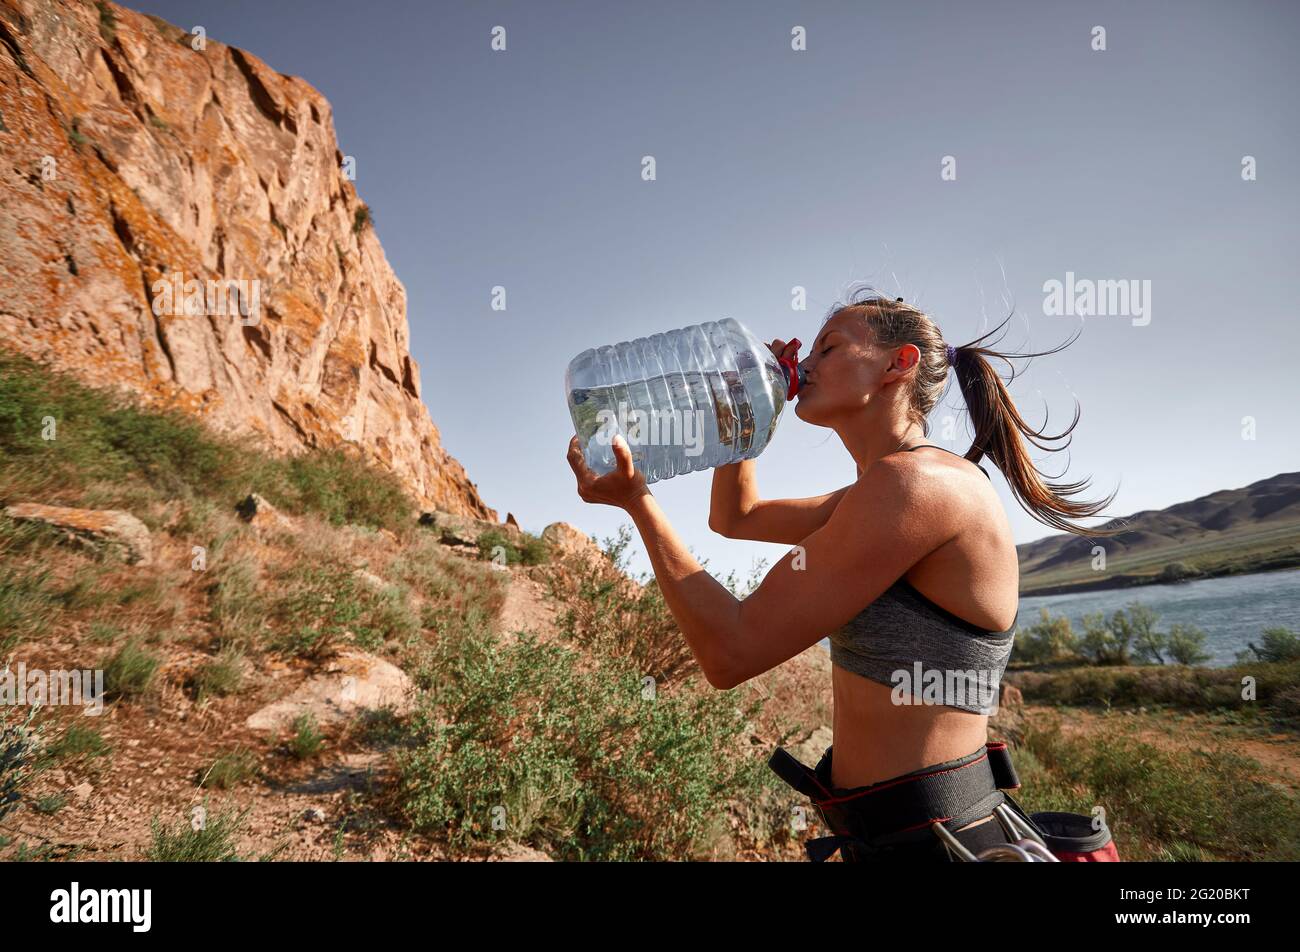 Young climber woman is drinking water from big huge bottle near the rocks and river at sunset. Tiredness and thirst concept. Stock Photo